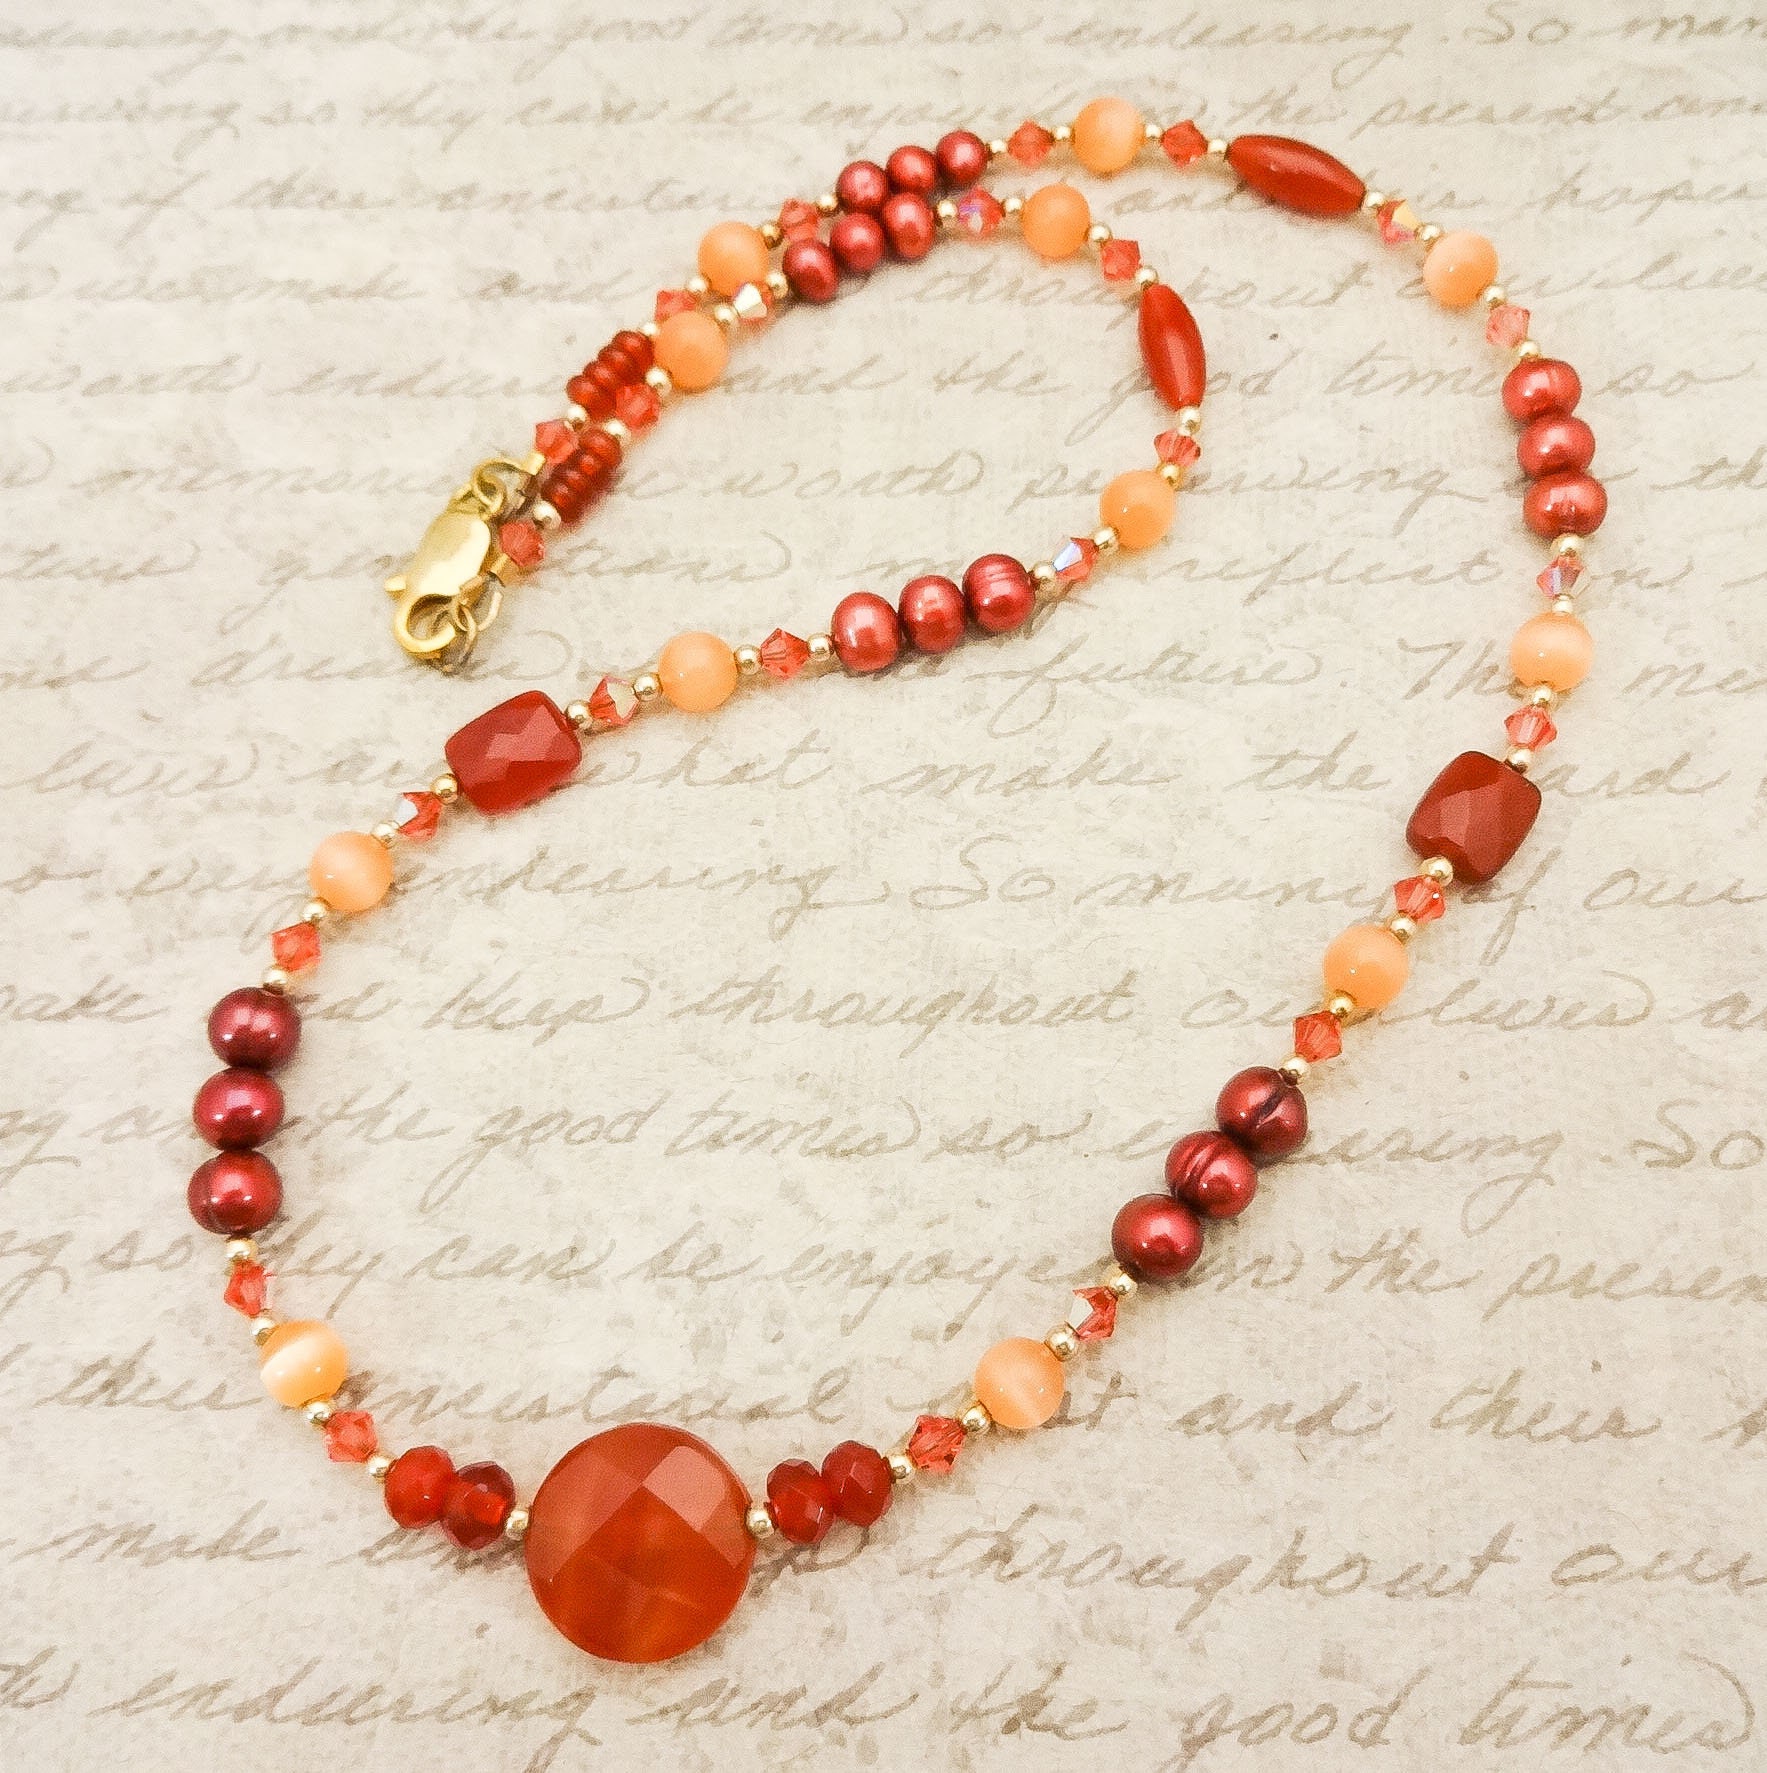 Orange Carnelian and Pearl Necklace, Gemstone Necklace, Gift for Wife ...